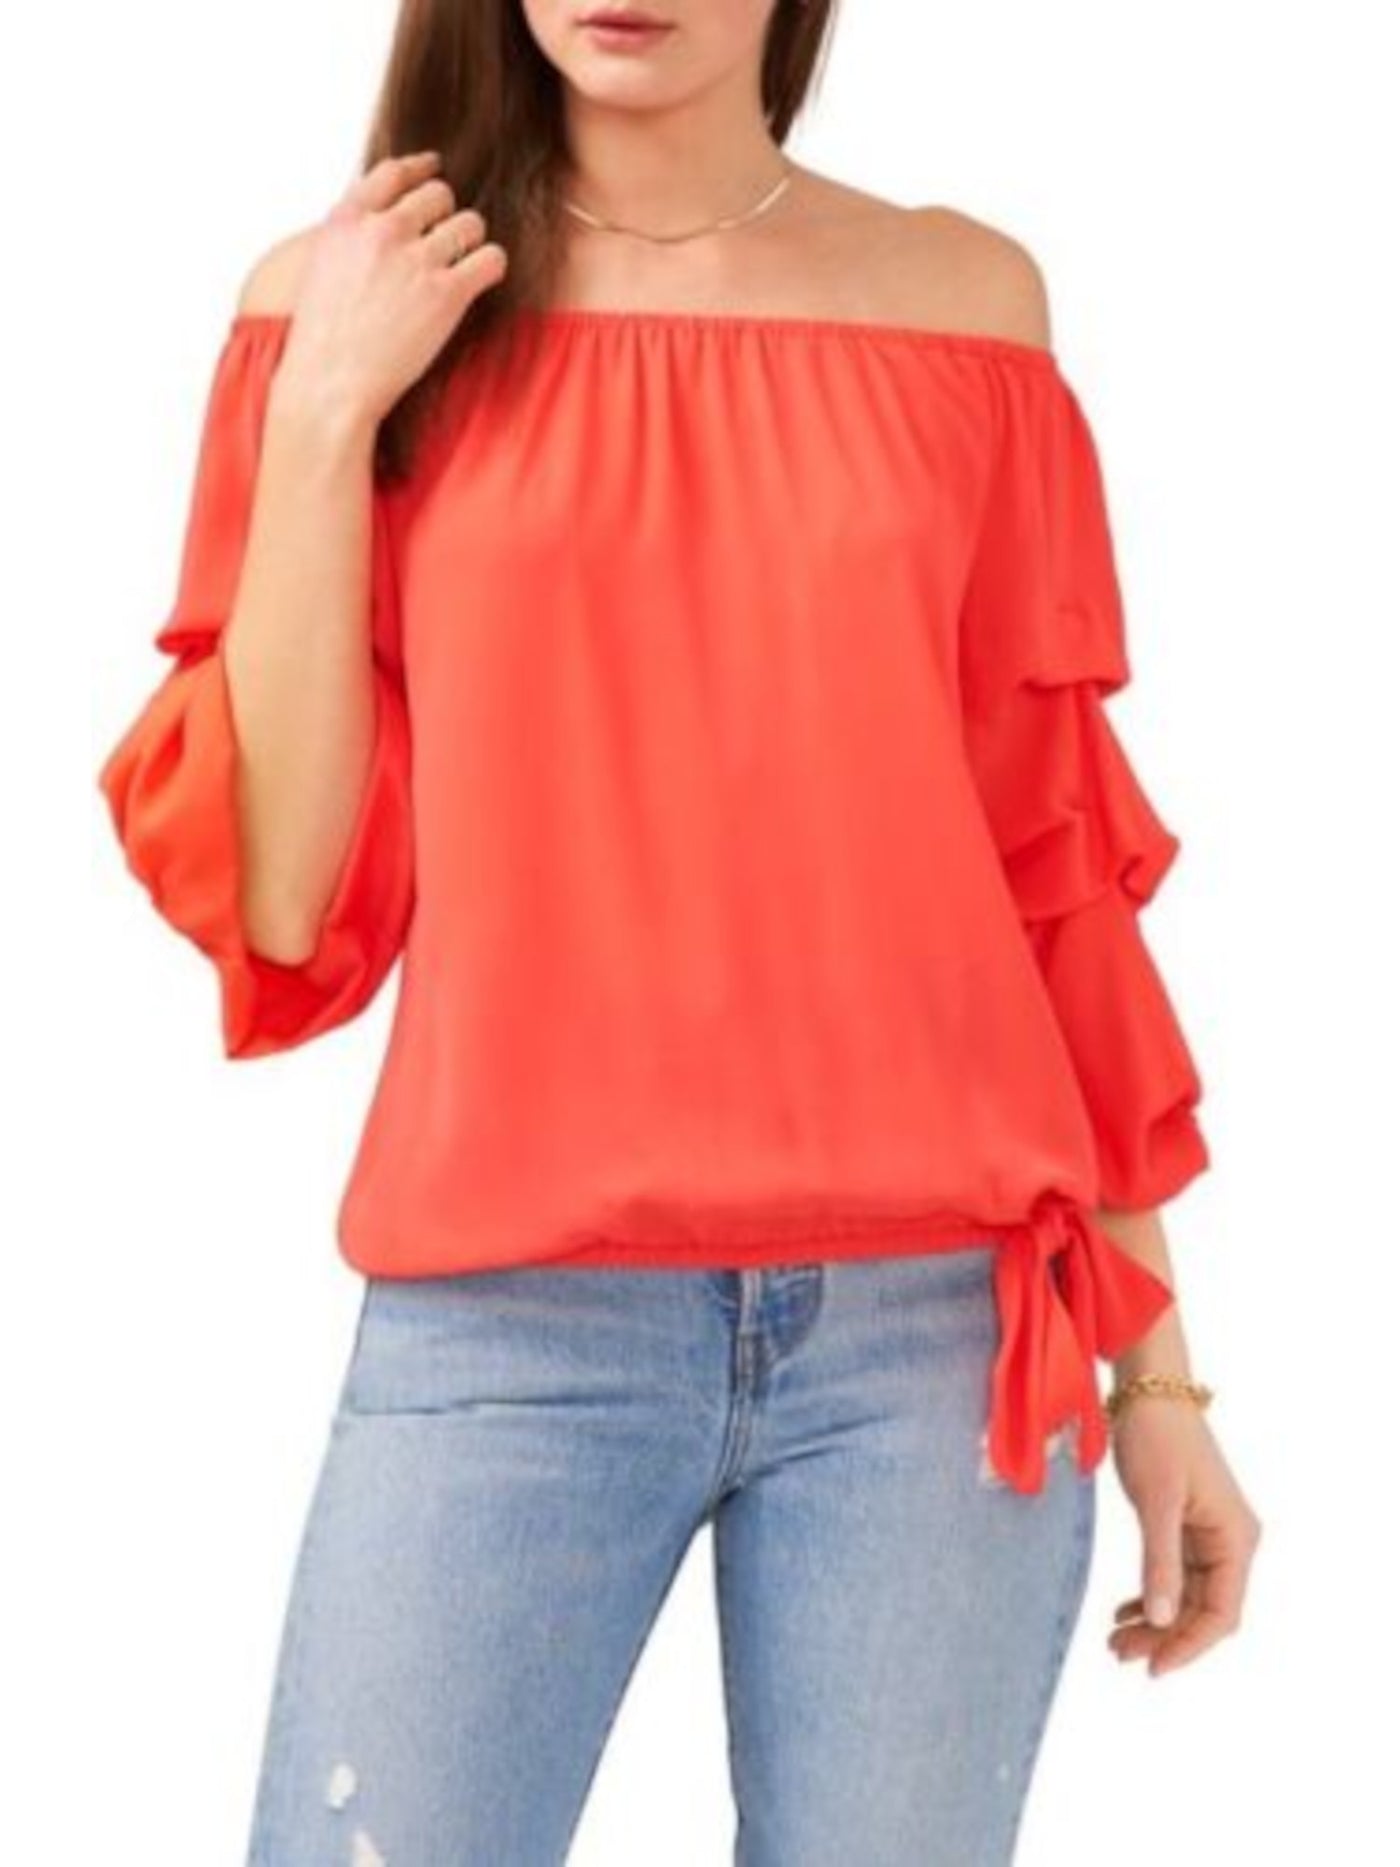 VINCE CAMUTO Womens Red Textured Ruched Tie Elasticized Sheer Unlined 3/4 Sleeve Off Shoulder Party Top L